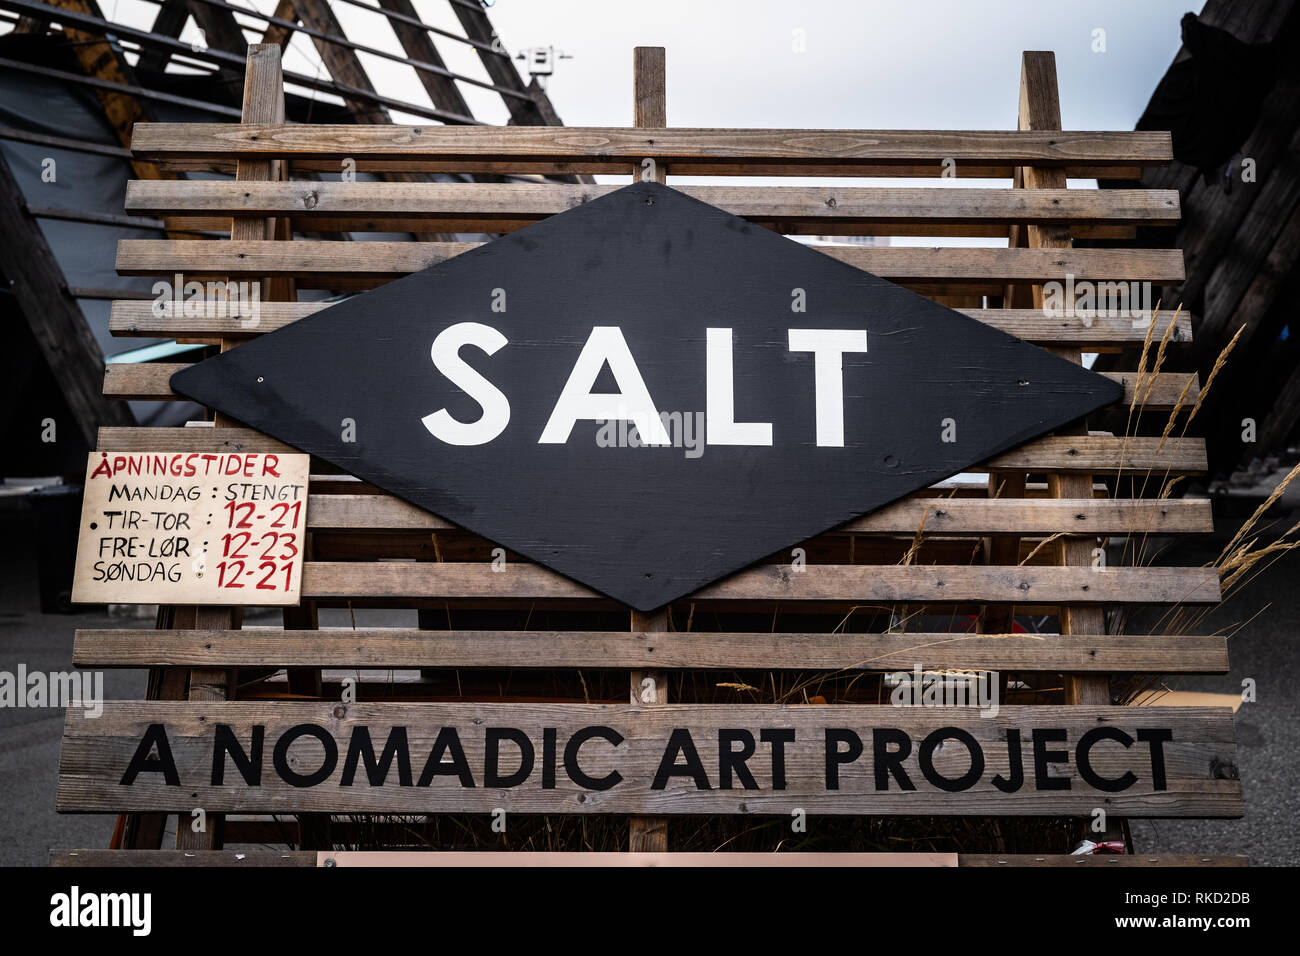 Special outdoor art project in Oslo called The Nomadic art project where 1000s of shirts hang outside on gigantic wooden poles at the Salt venue. Stock Photo